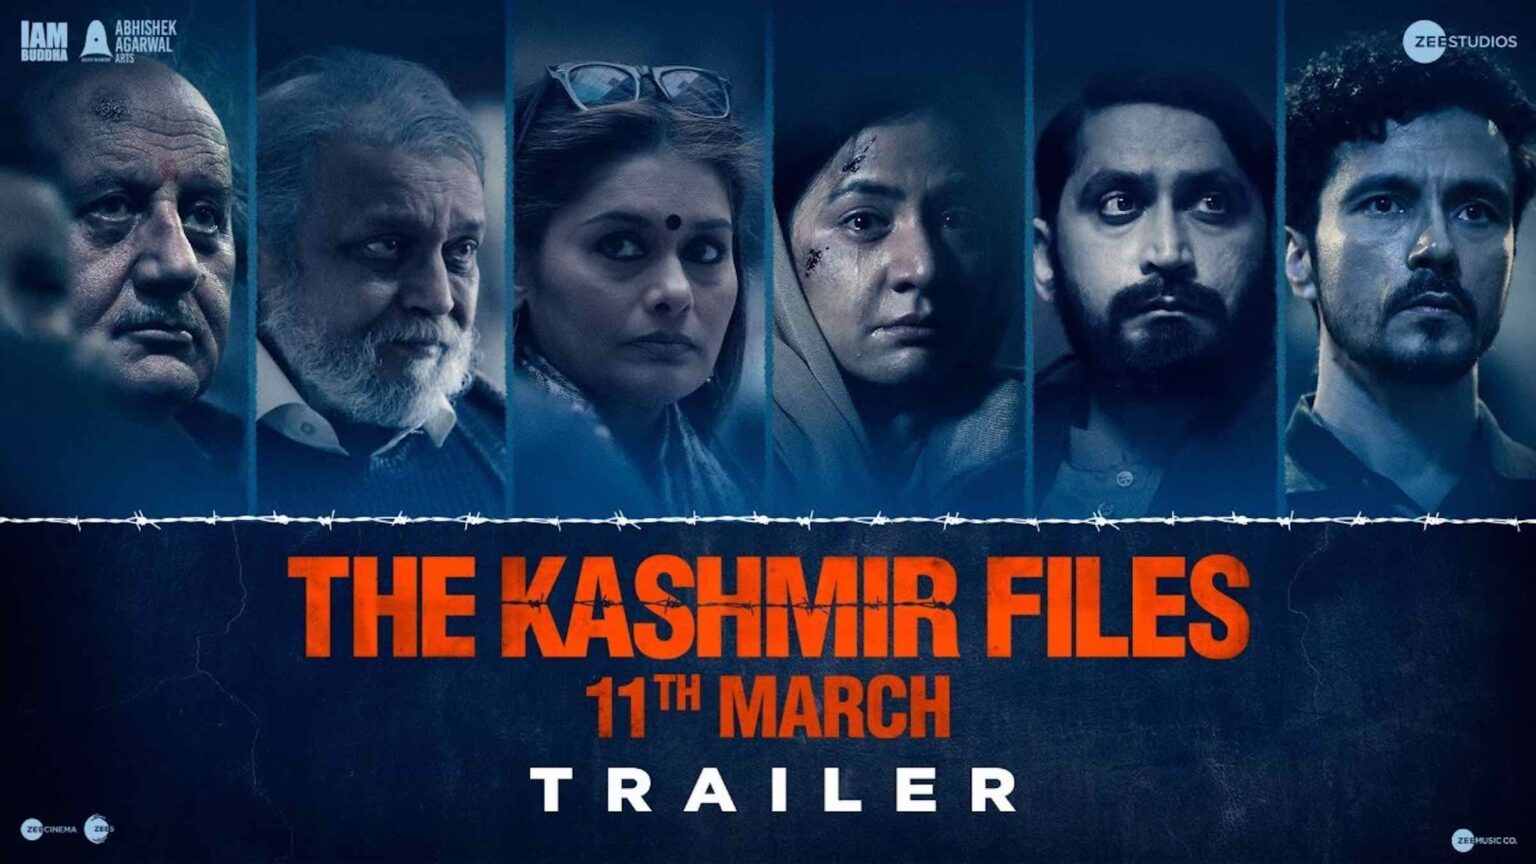 'The Kashmir Files' is currently one of the most controversial films. Here's all you need to know about the film and how to stream it online for free.